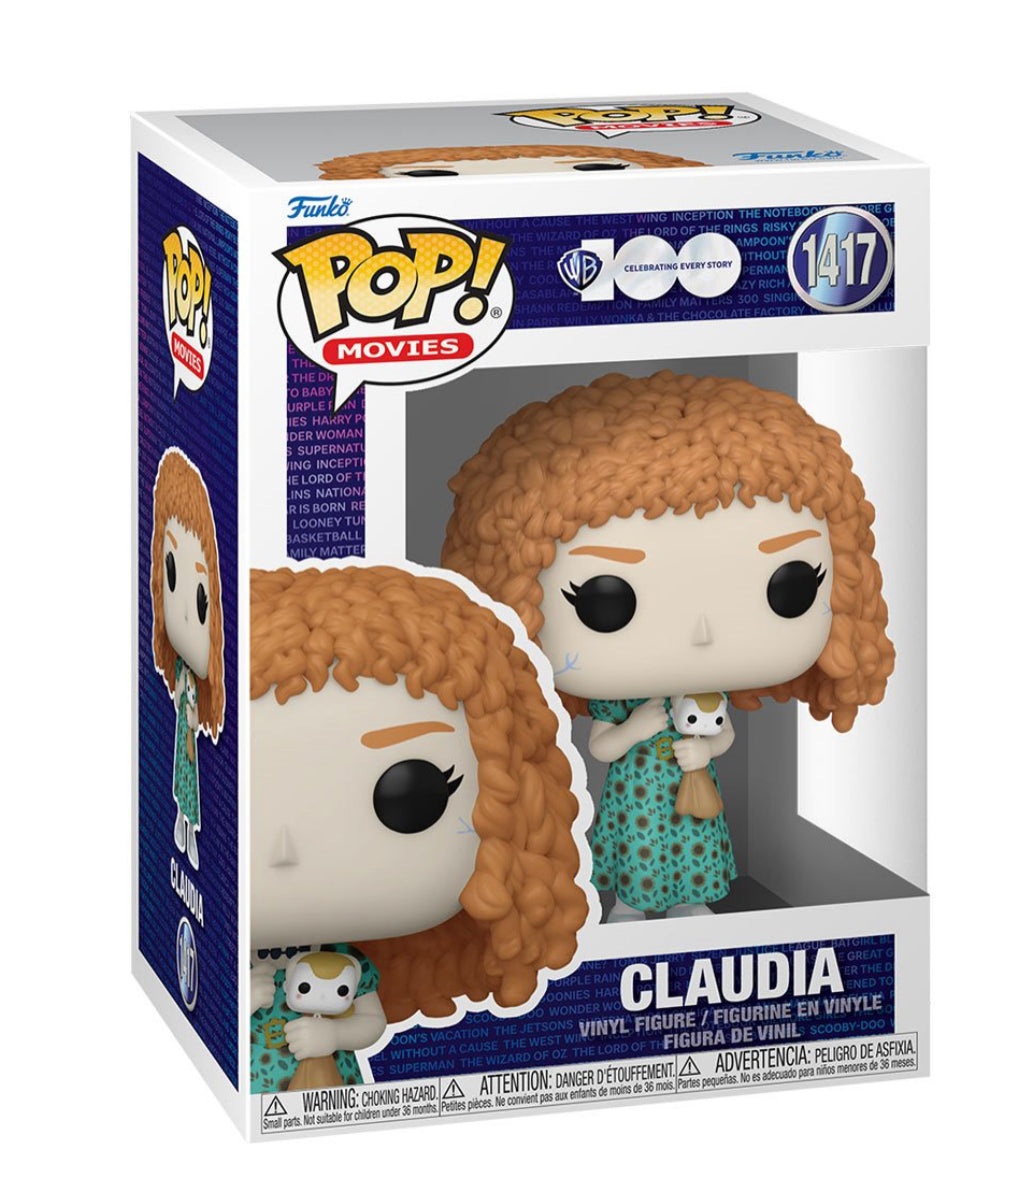 Funko POP! Movies #1417 Interview With The Vampire Claudia